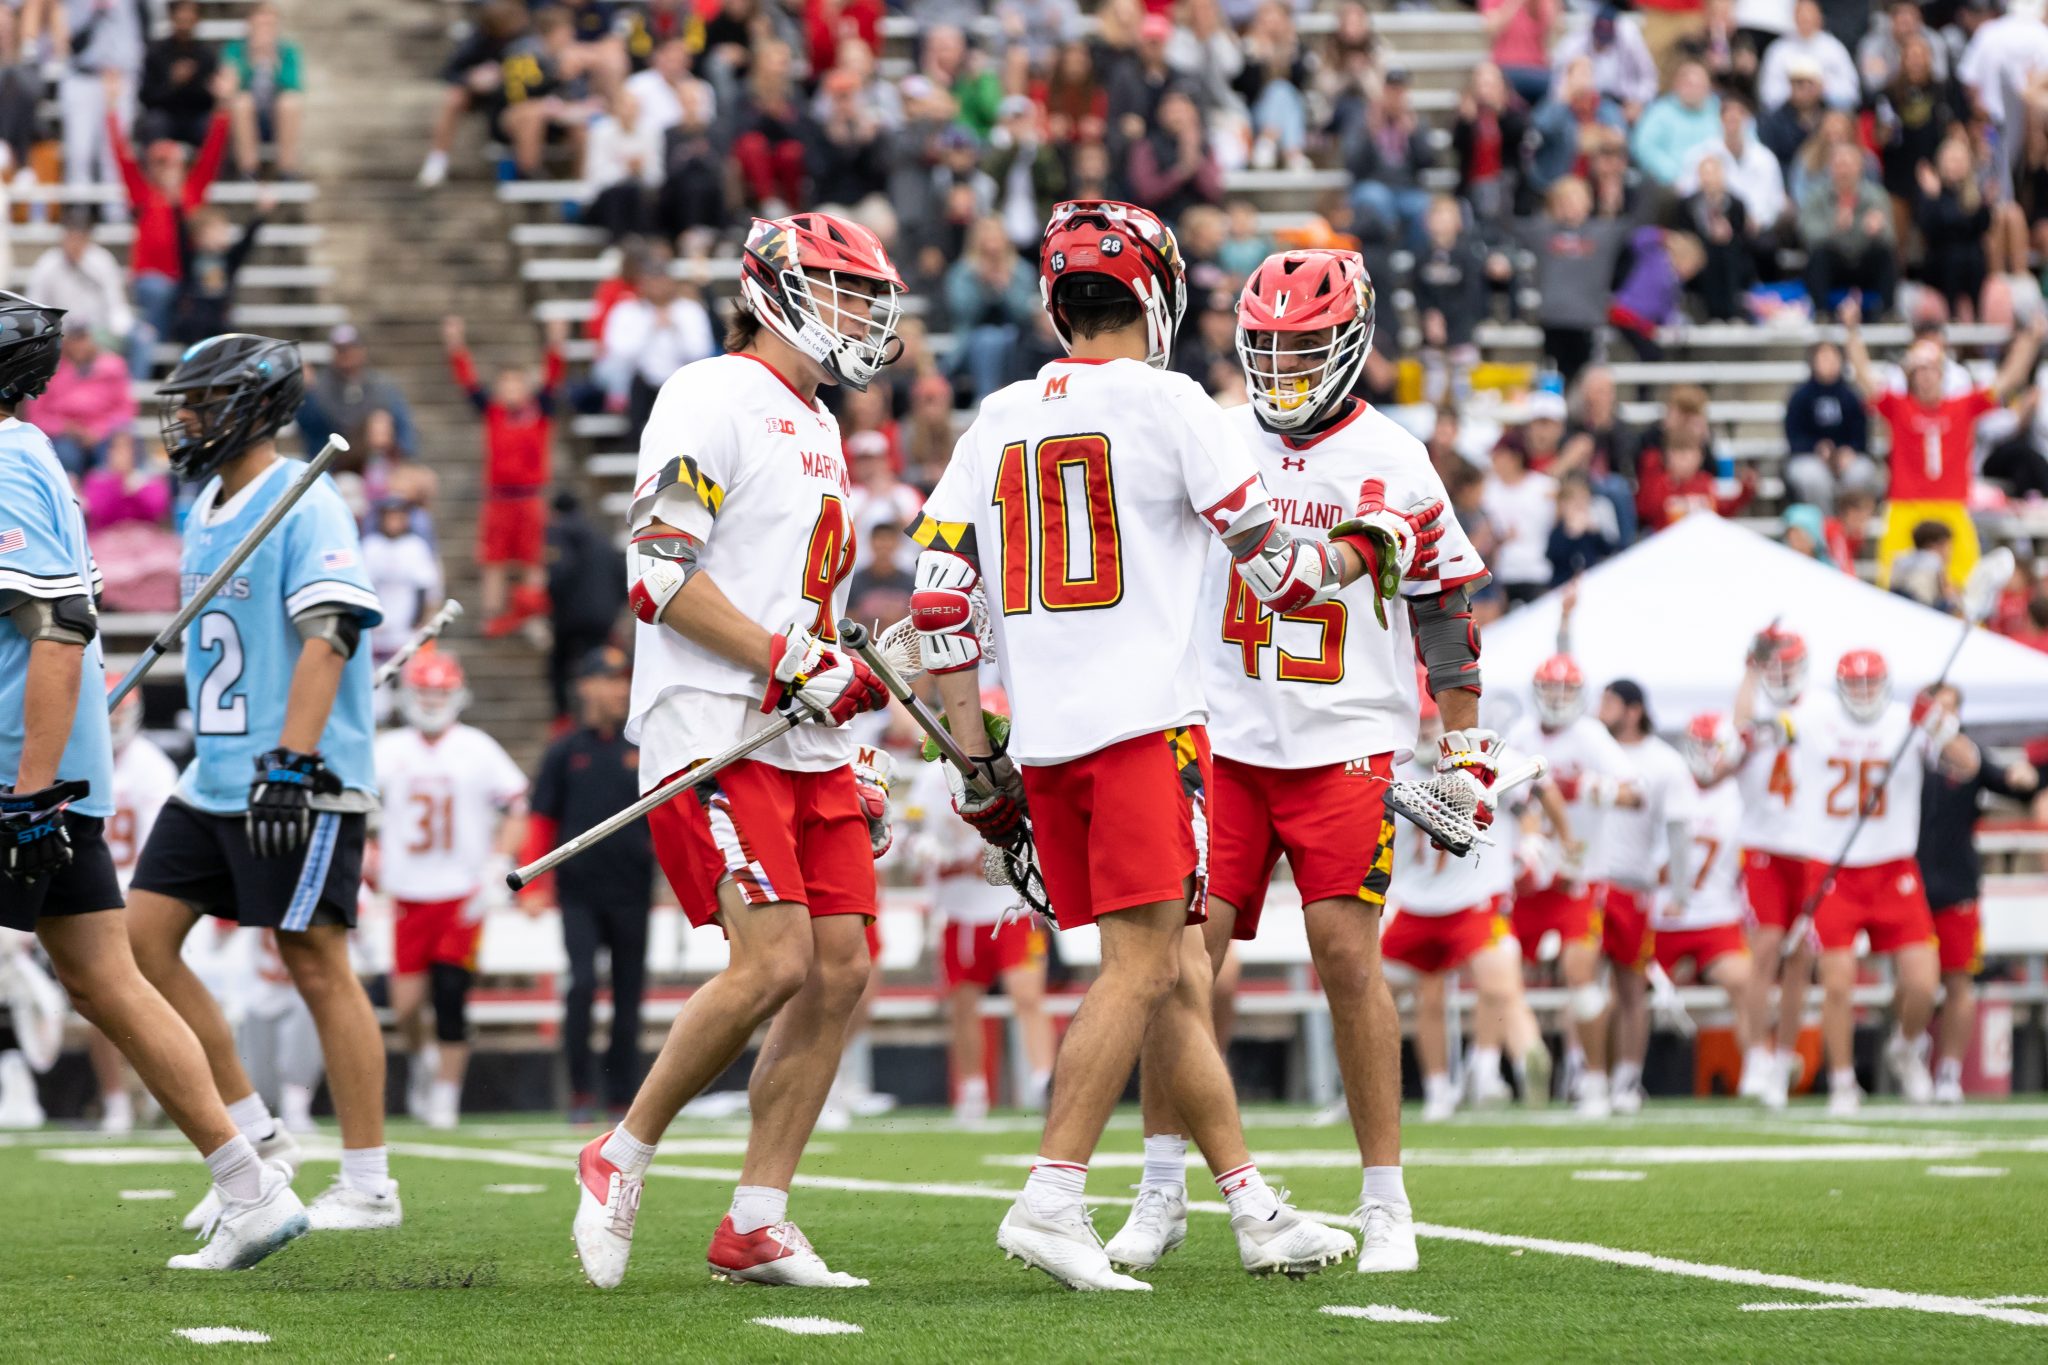 Maryland men’s lacrosse’s NCAA tournament path has been rockier than